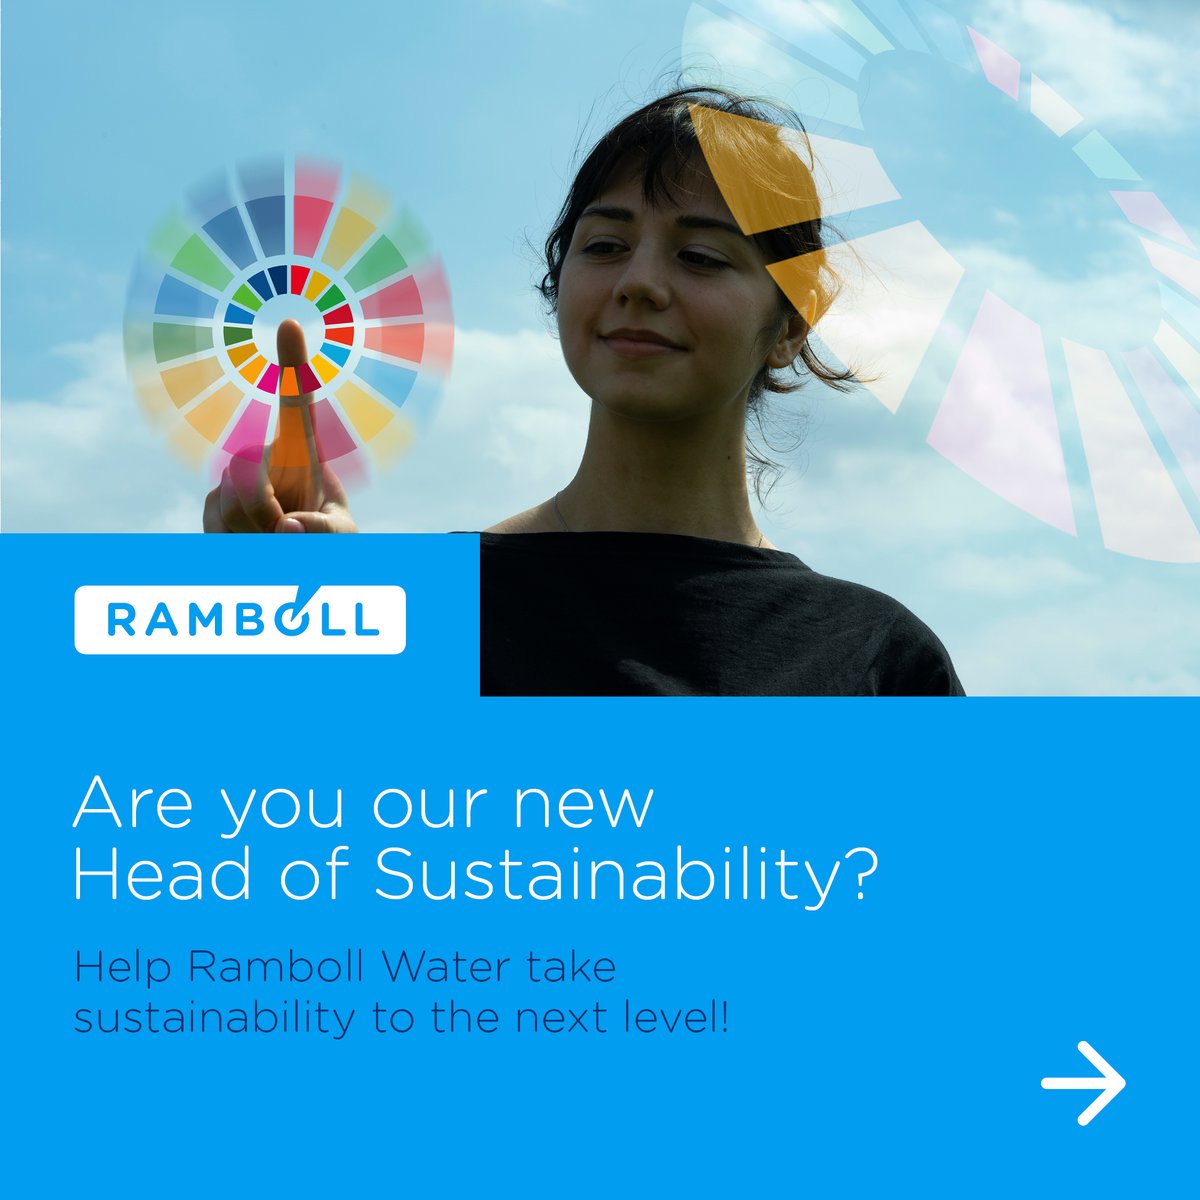 We want to help our clients close the gap to a sustainable future! Want to join? Apply now 👇

ramboll.com/careers/csrp?j…

#LetsCloseTheGap #InvitingBrightMinds #Water #Sustainability @ramboll @ramboll_fi @rambollamericas @ramboll_norge @ramboll_uk